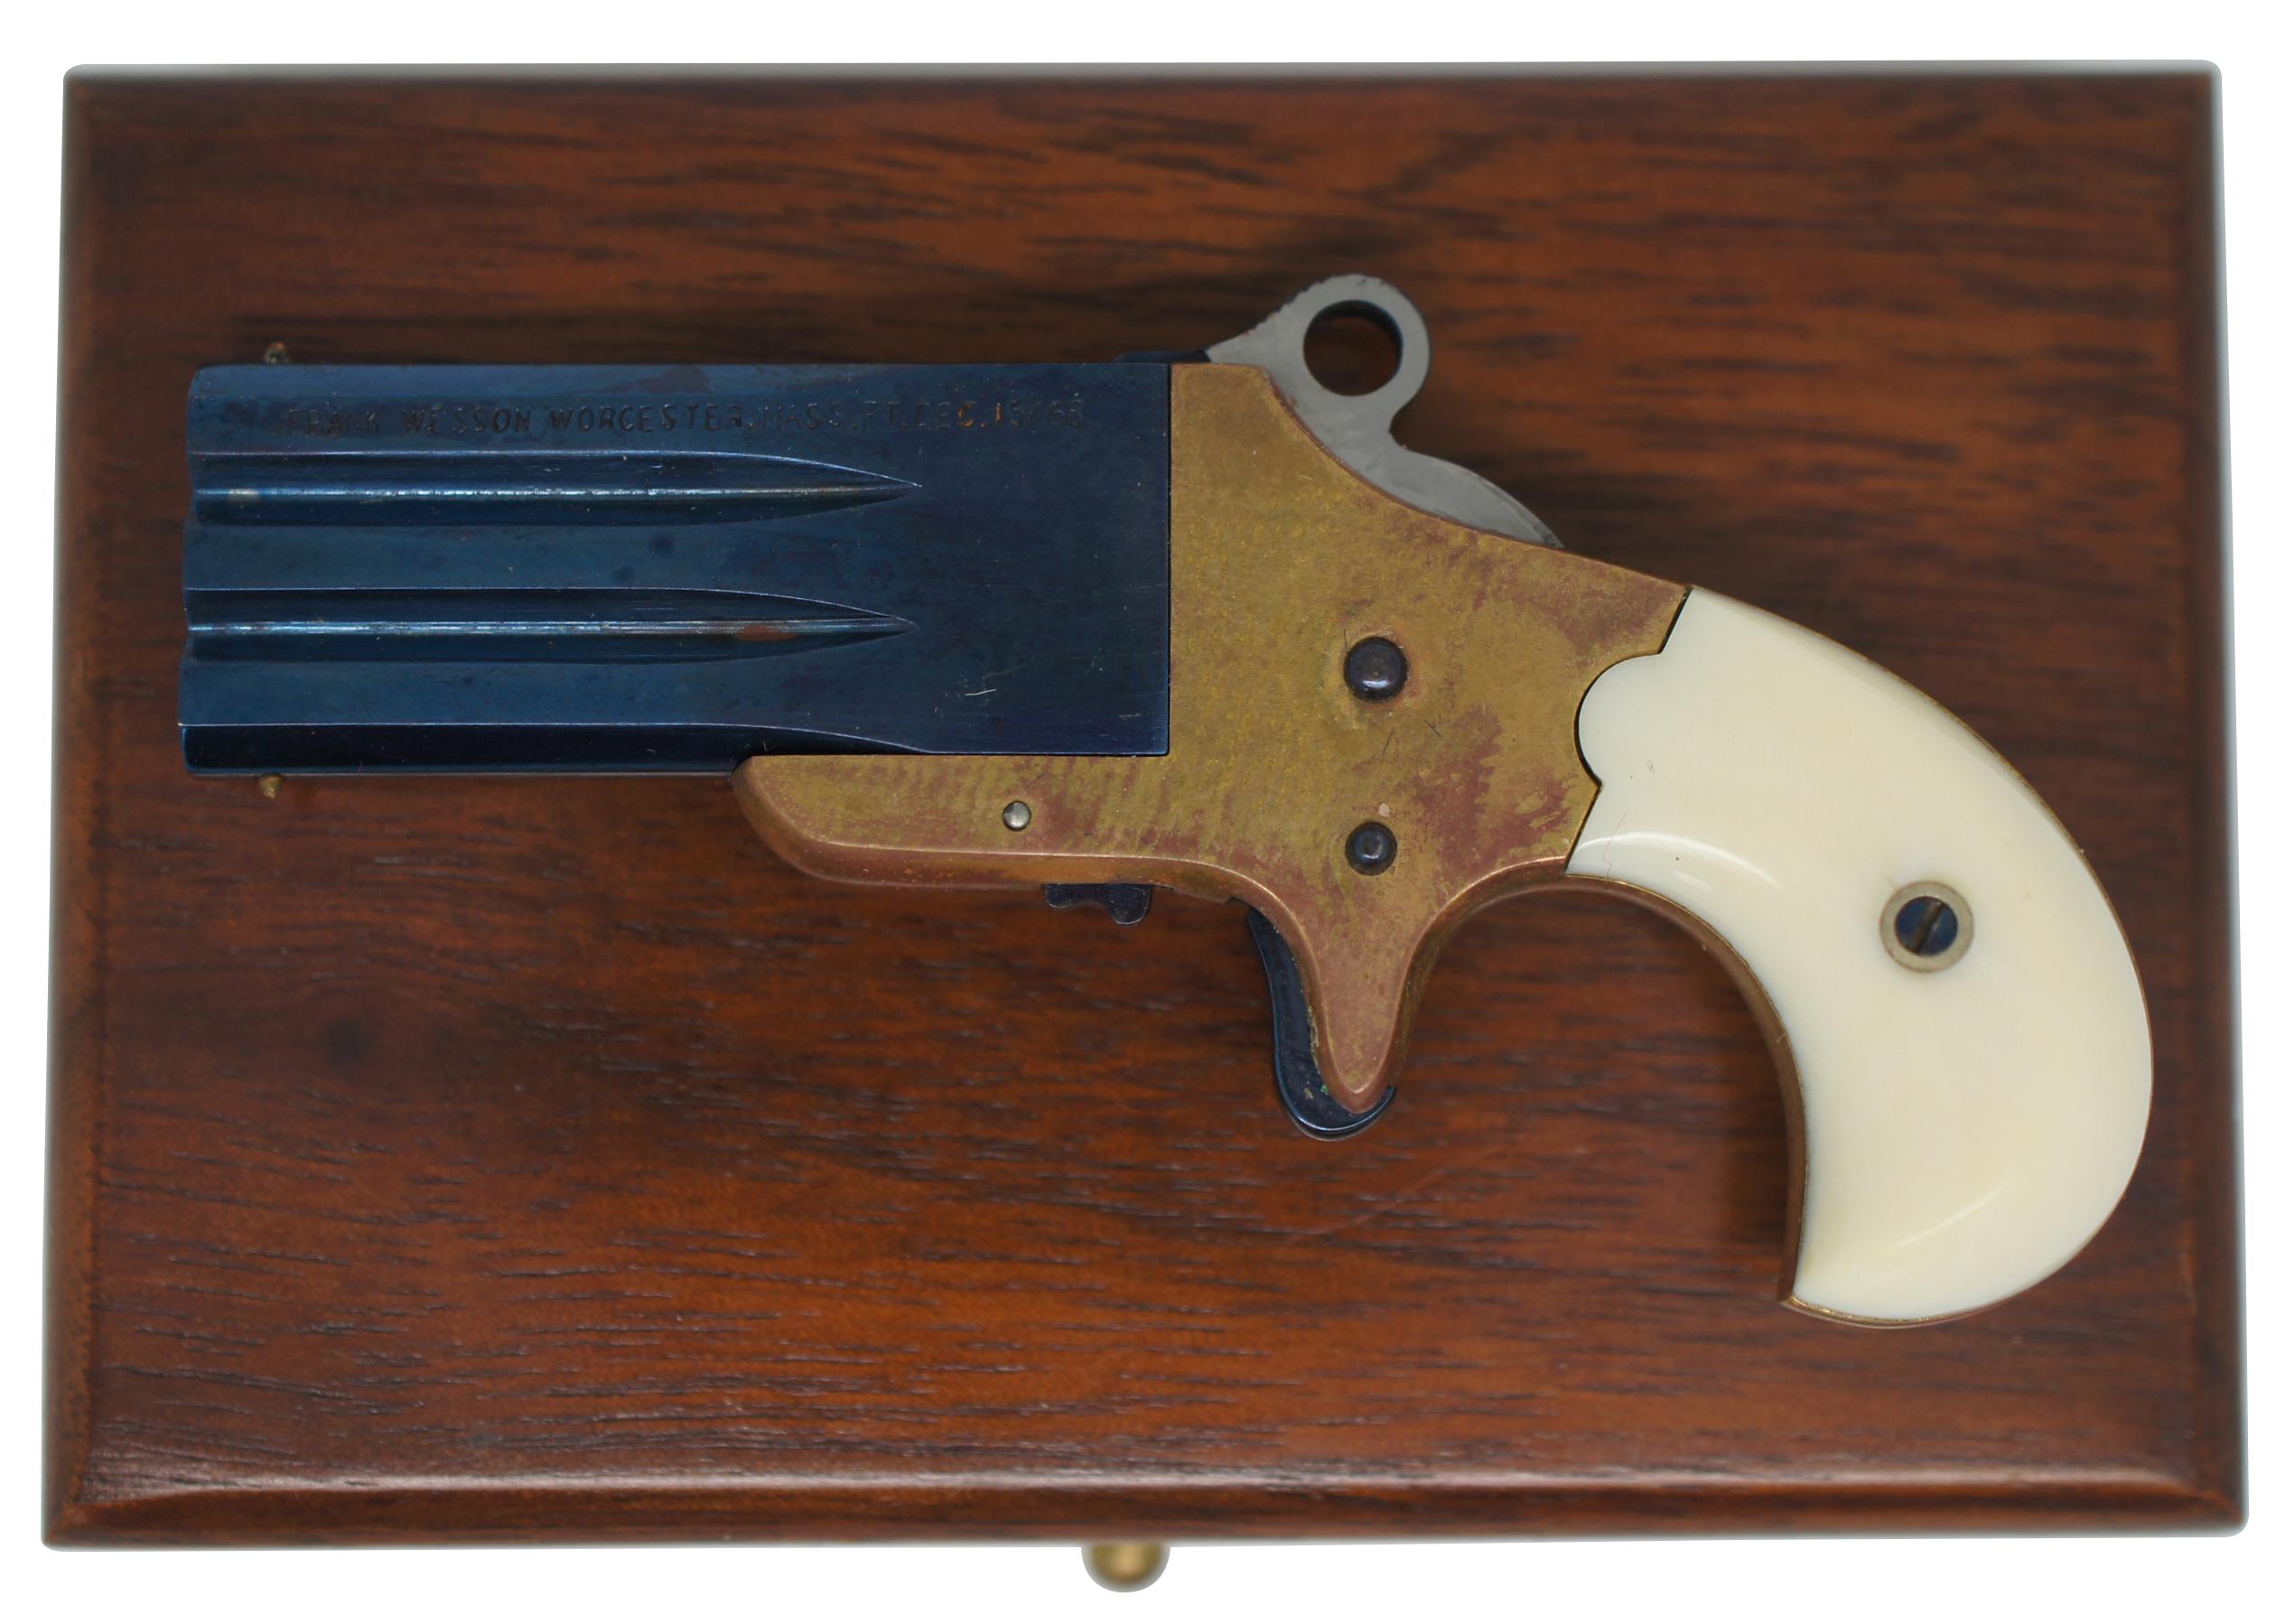 Vintage L.H. Smith miniature Frank Wesson swivel barrel two shot derringer pin fire cap gun and velvet lined walnut case marked “L.H. Smith 5.” Includes full set of blank cartridges and ram rod.

Gun - 2.5” x 0.5” x 1.25” / Case - 2.875” x 2” x